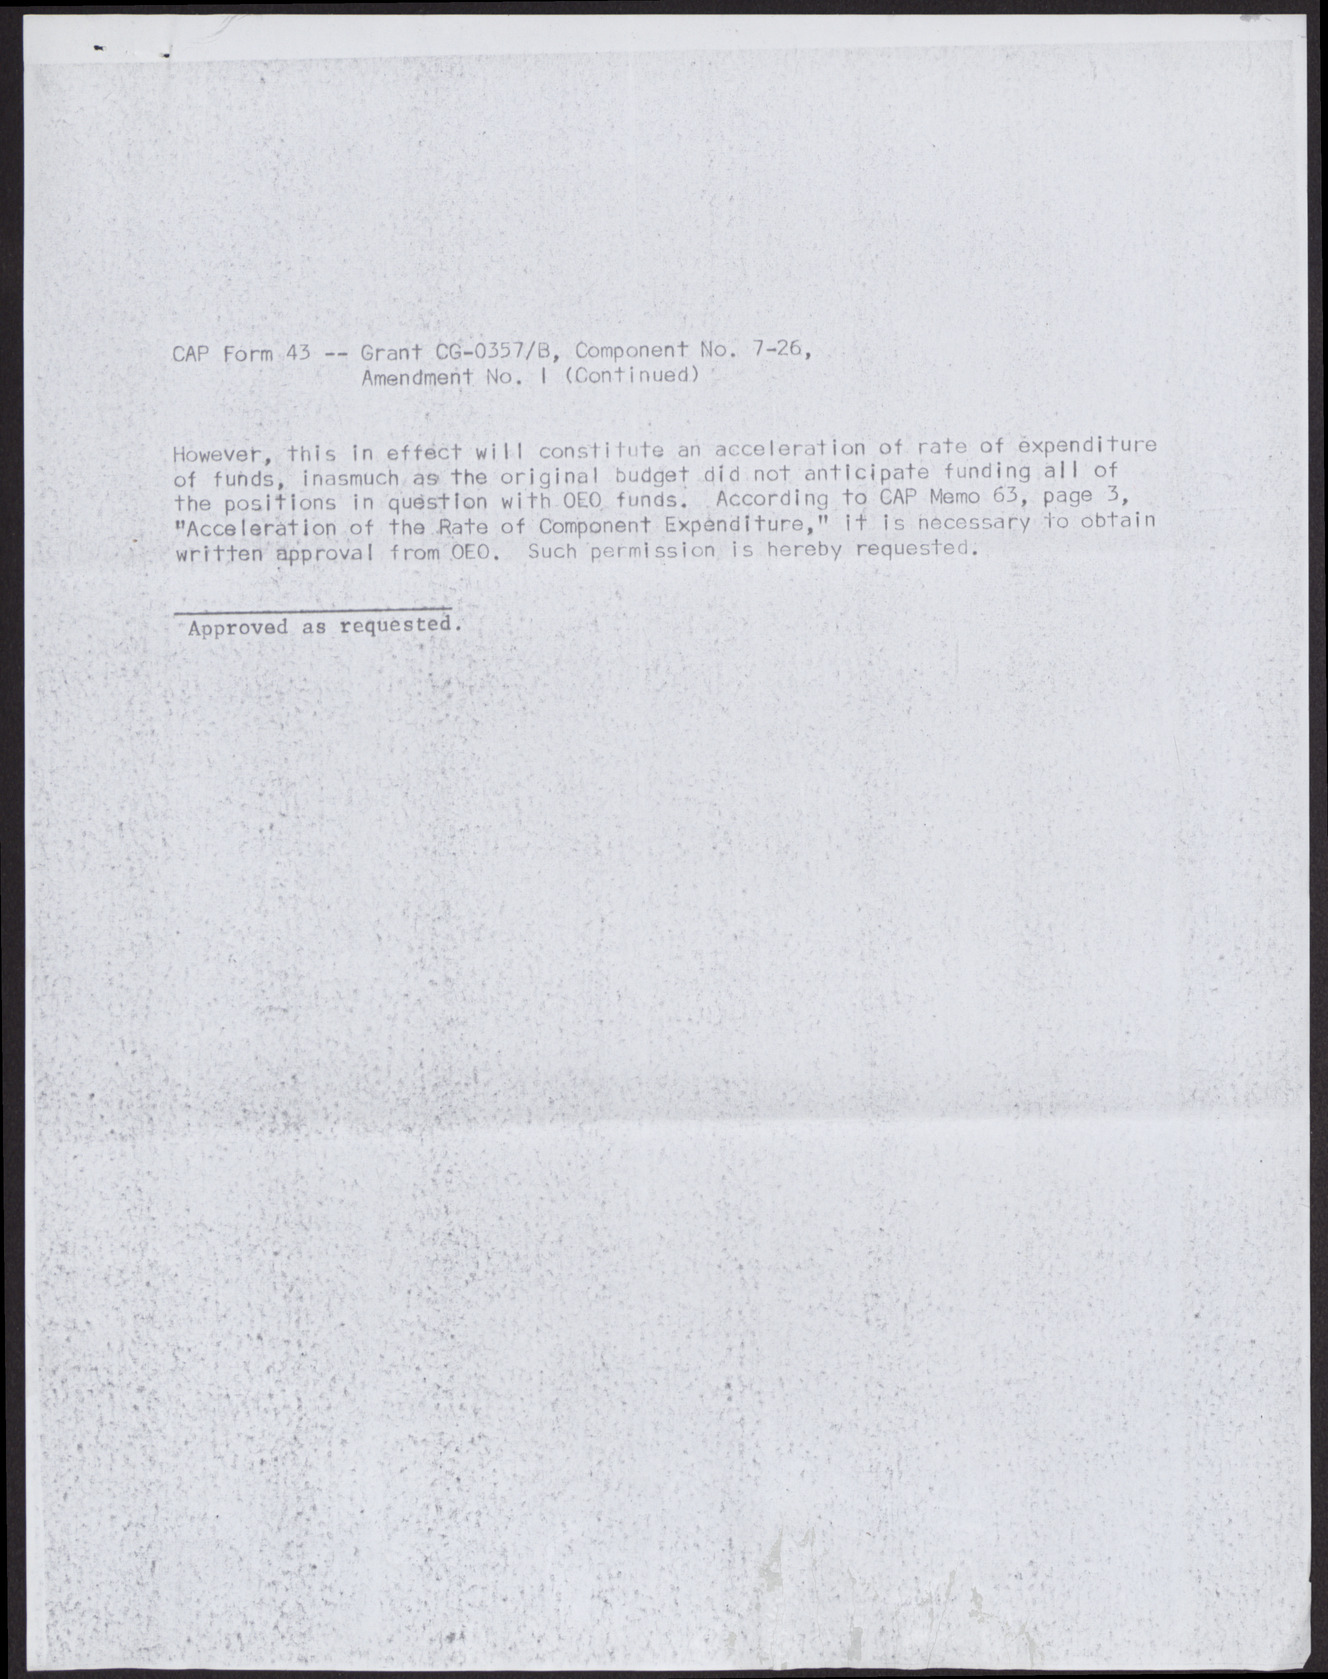 Letter to Mr. George Gant from W. F. Cottrell with attached copies of approval papers relating to the Manpower project (4 pages), August 16, 1967, page 4